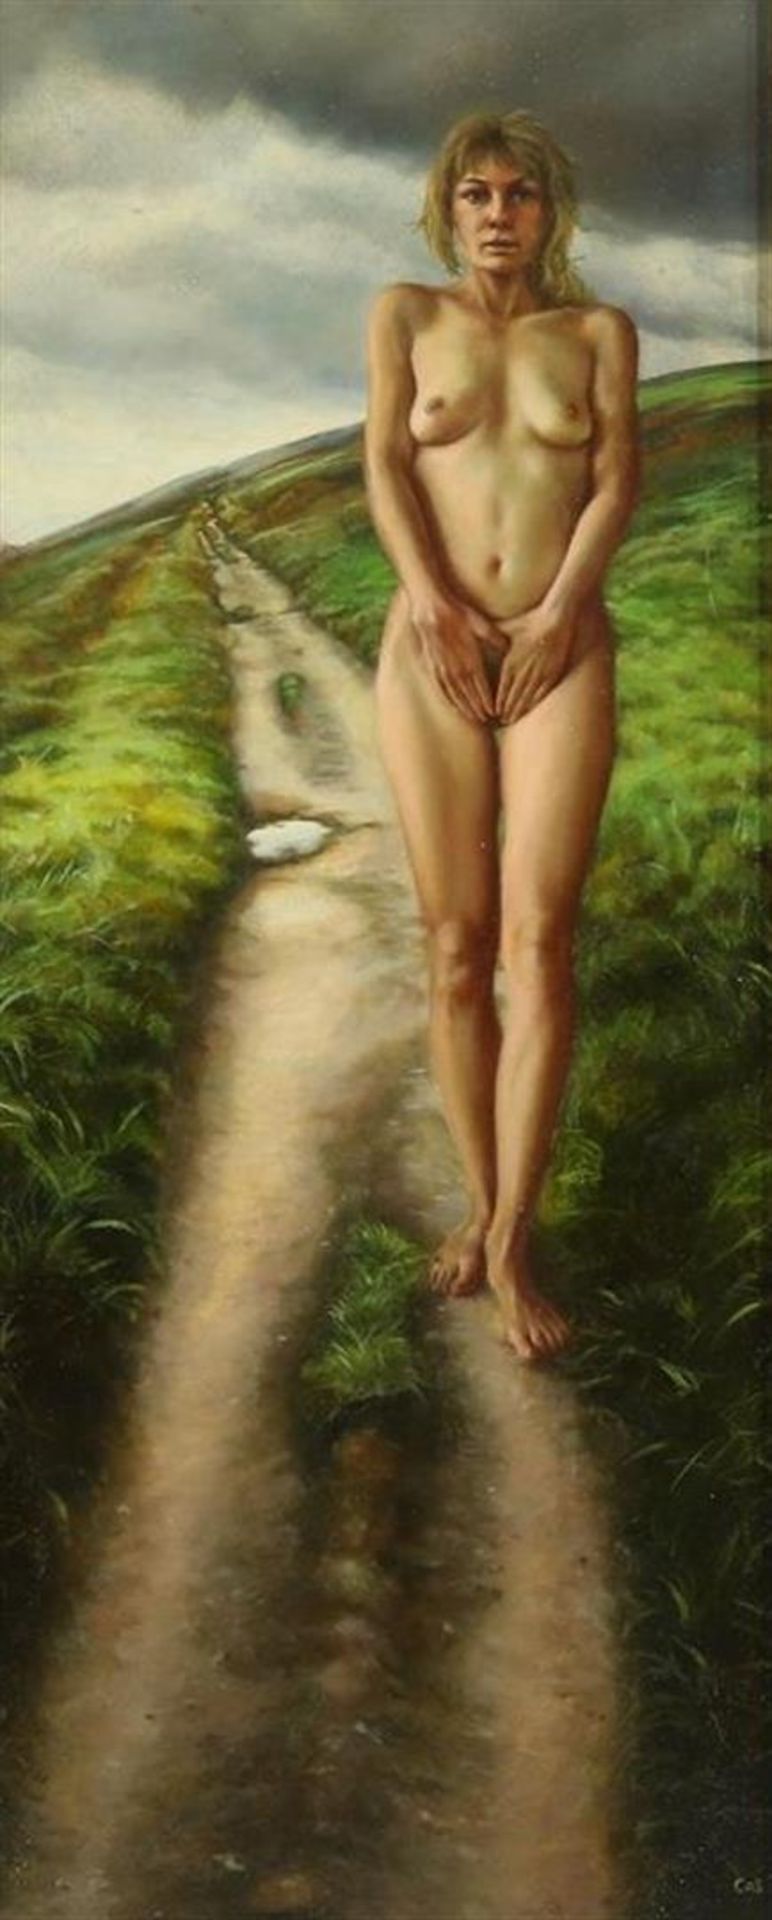 Cas Waterman (1958-) Nude, titled: "The winding path" signed l.r. Panel 42 x 20 cm.